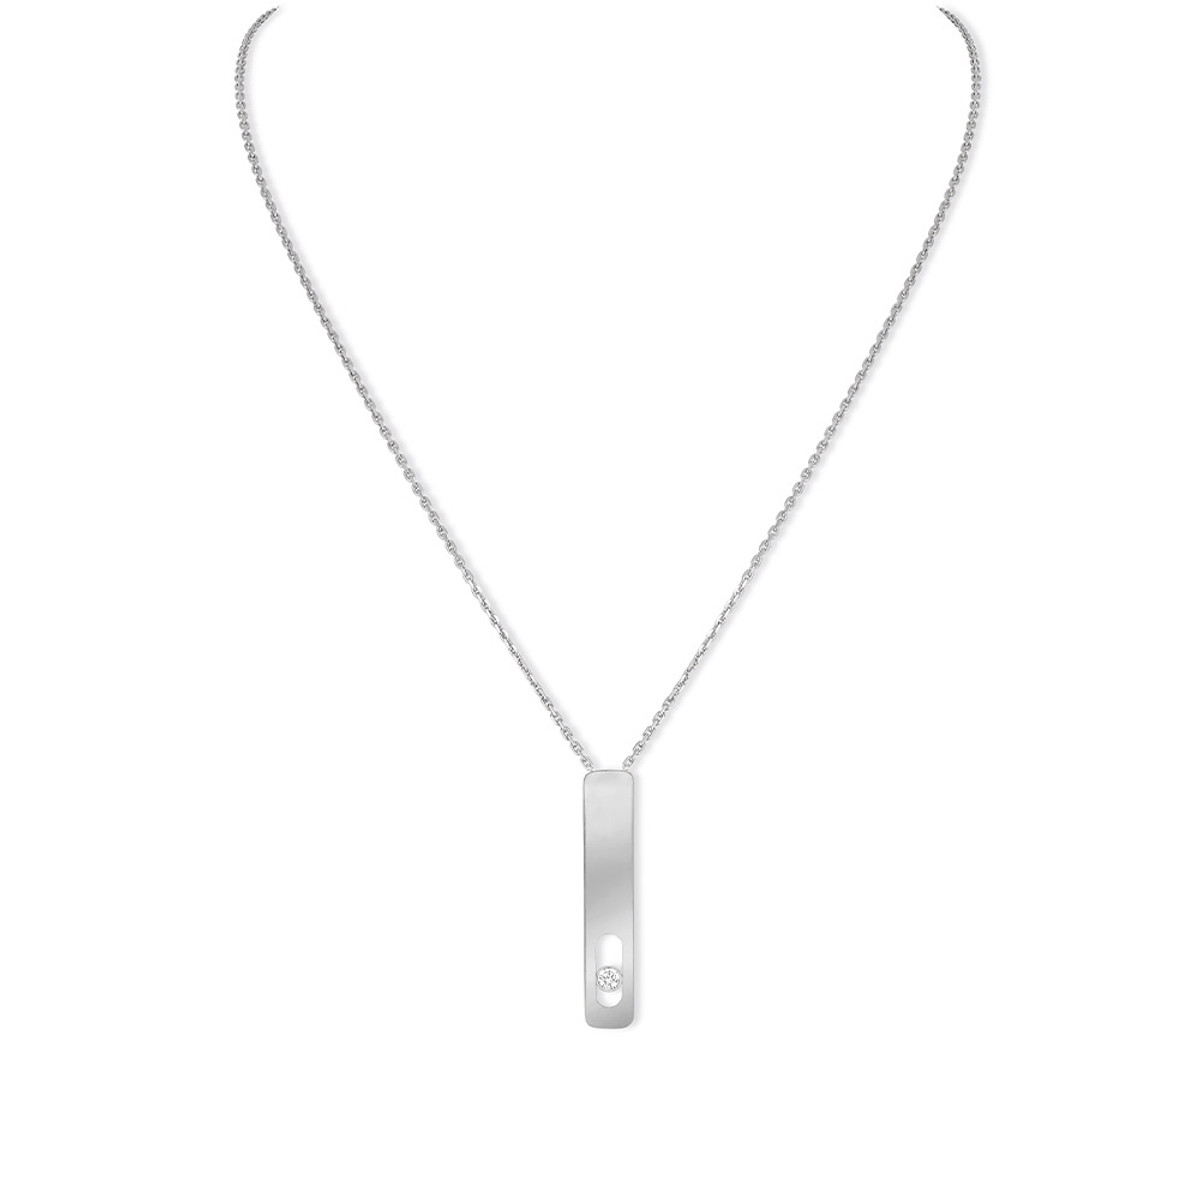 Messika 18K White Gold My First Diamond Necklace-56345 Product Image